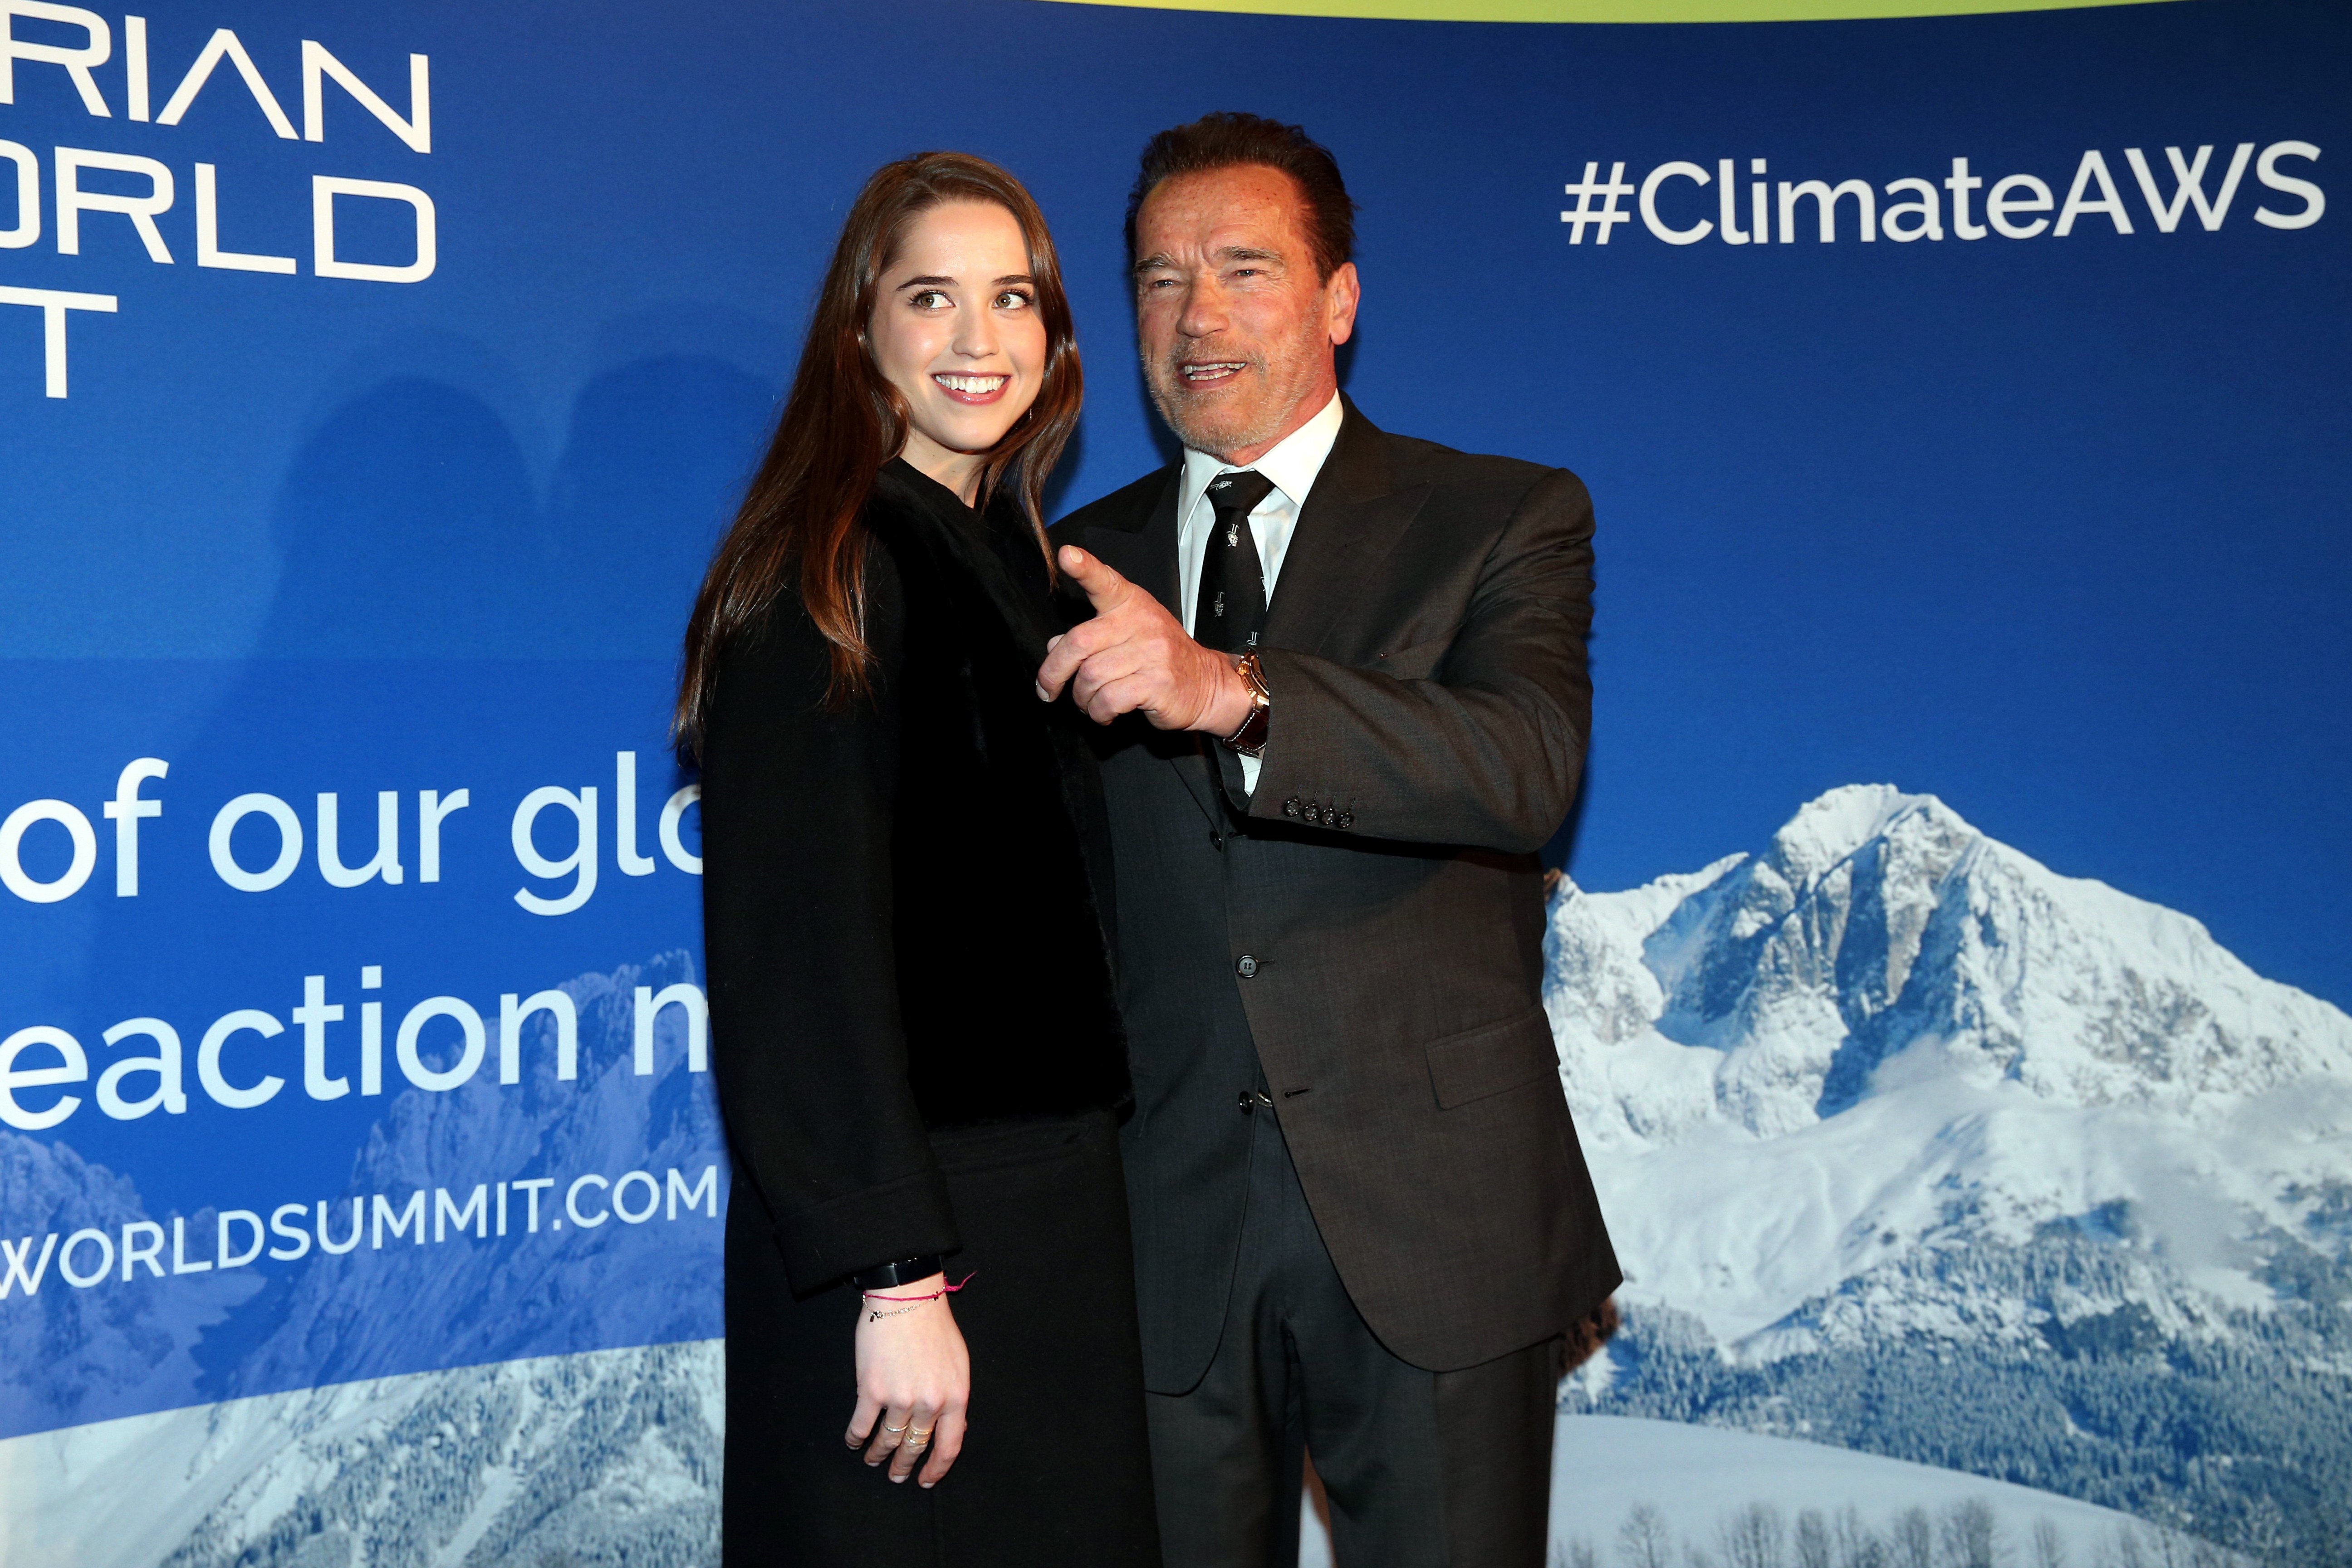 Arnold Schwarzenegger and Christina Schwarzenegger at the Schwarzenegger climate initiative charity dinner at Country Club in Kitzbuehel, Austria, on January 23, 2020. | Source: Getty Images